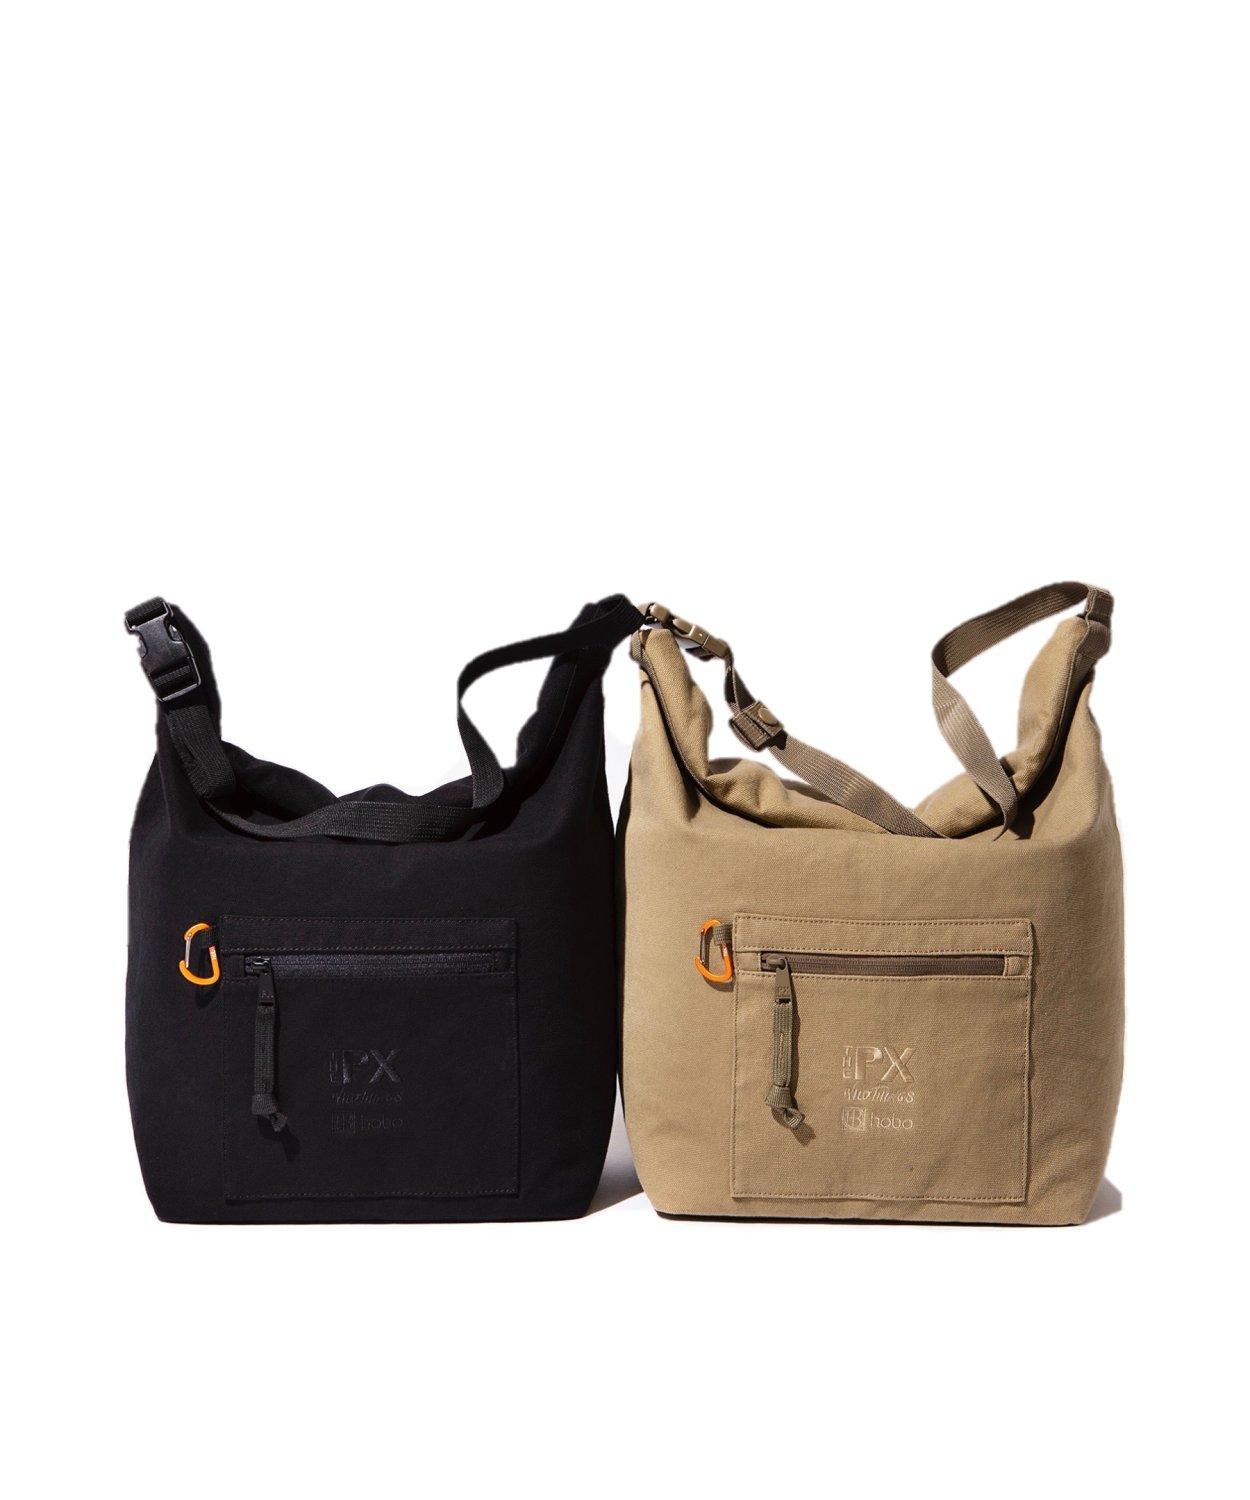 THE PX WILD THINGS × HOBO / PLAY SOFT COOLER ROLLTOP BAG COTTON